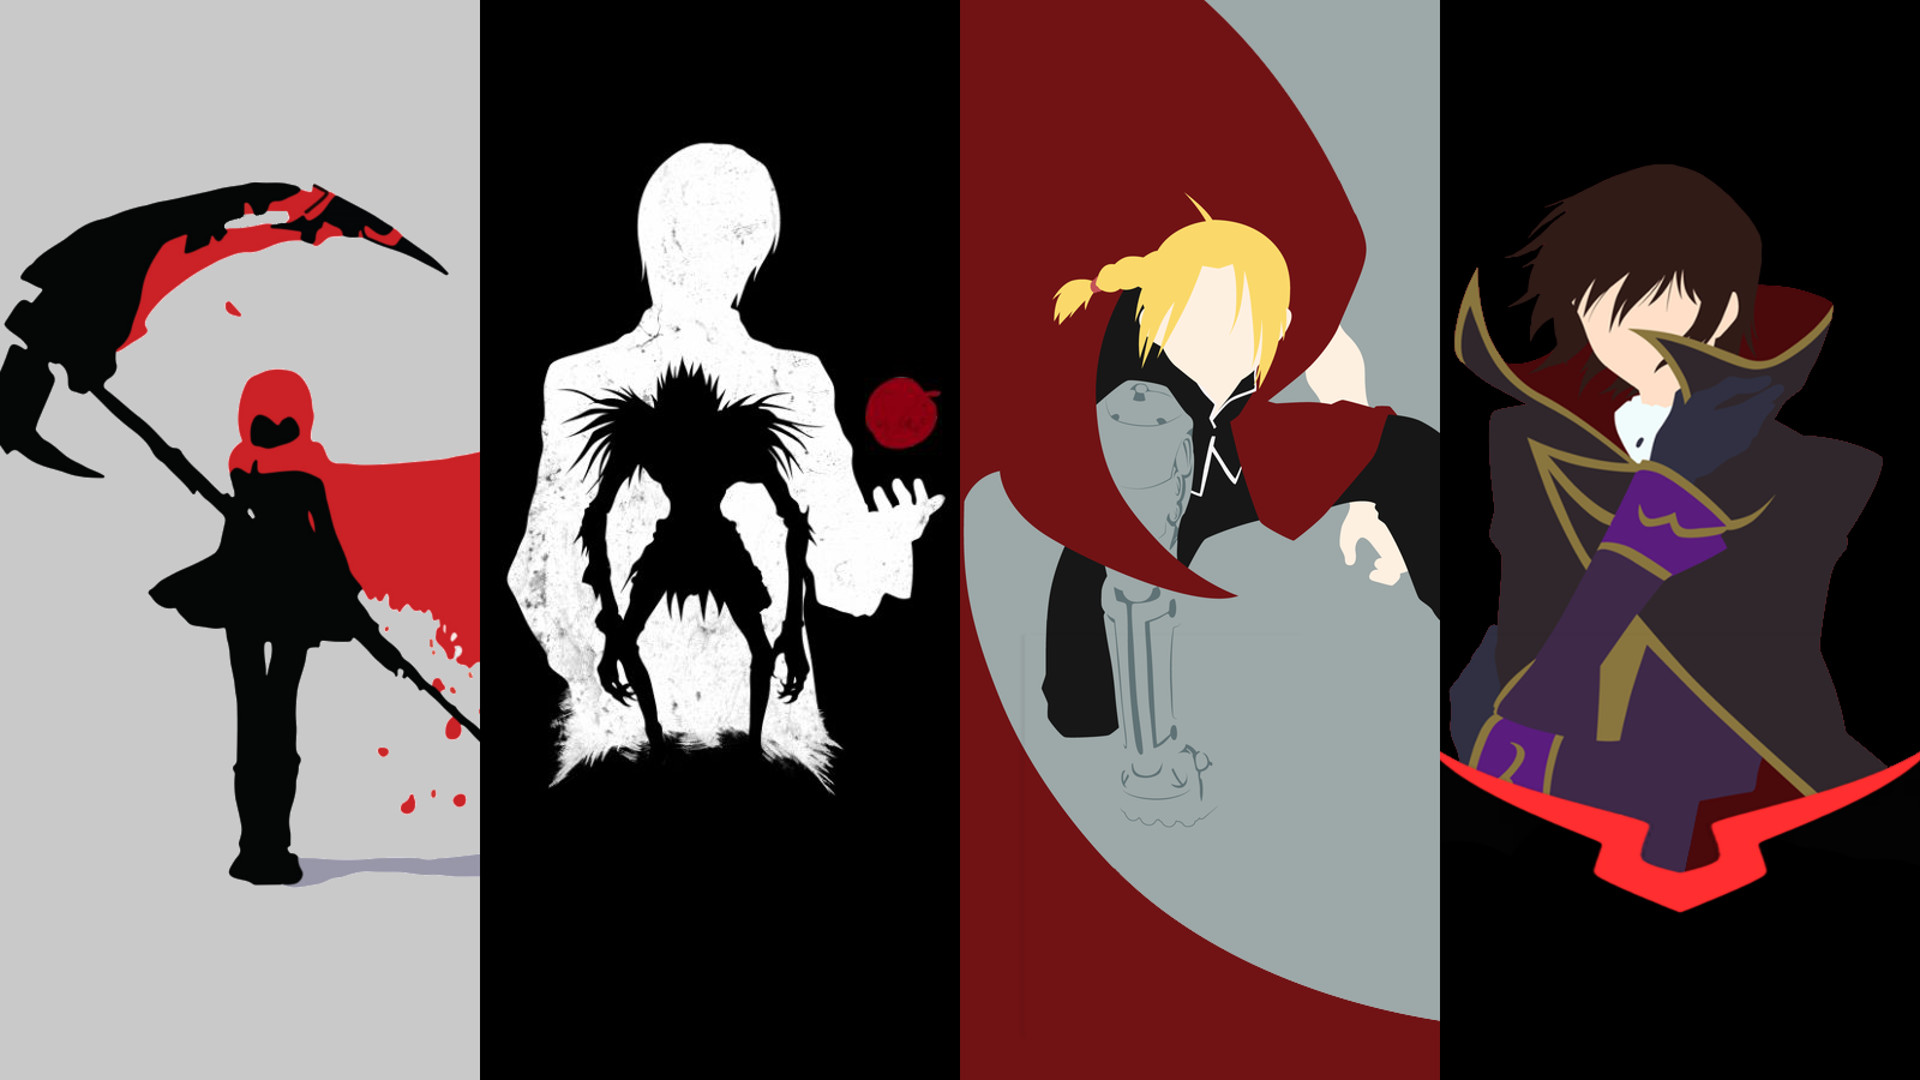 1920x1080 Best wallpaper gallery with Deathnote, FMA, Code Geass and RWBY wallpaper  and HD wallpapers. We collected full High Quality pictures and wallpapers  for your ...